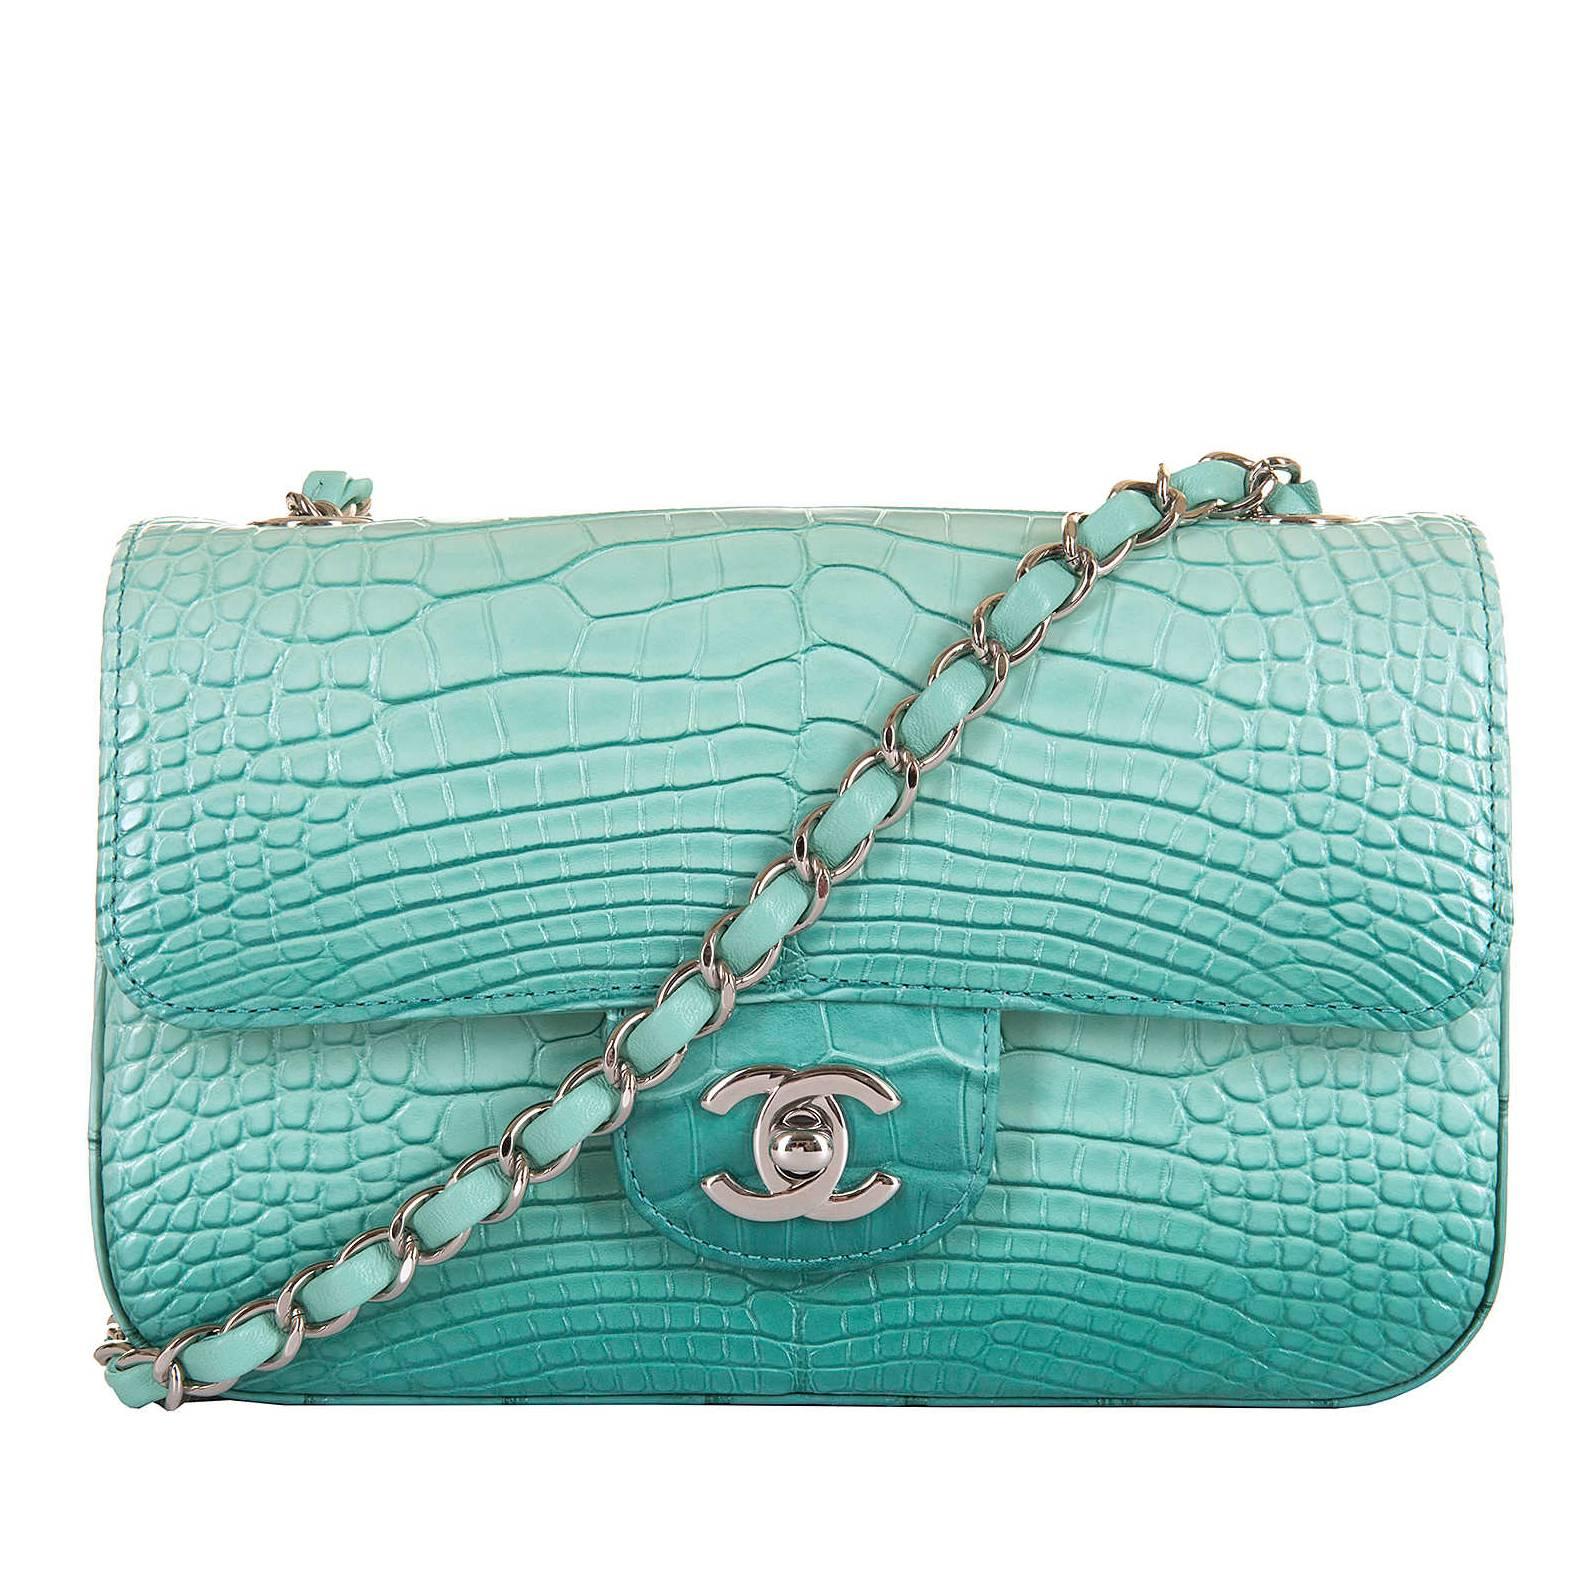  NEW MINI Chanel Turquoise Alligator 'Sac Timeless' Bag with Silver Hardware